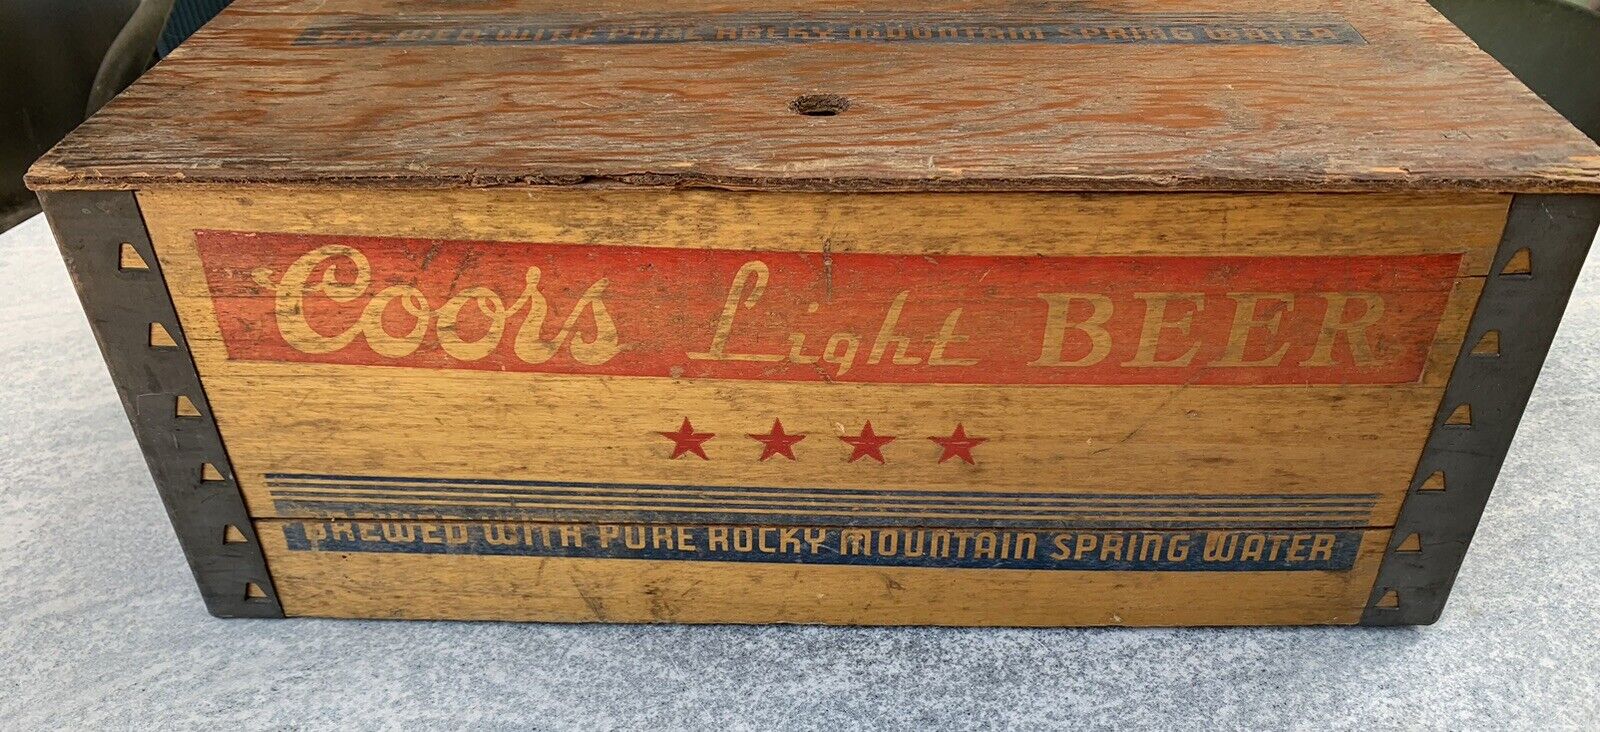 RARE VINTAGE 1940S COORS LIGHT BEER BOTTLE WOOD CRATE BOX WITH LID